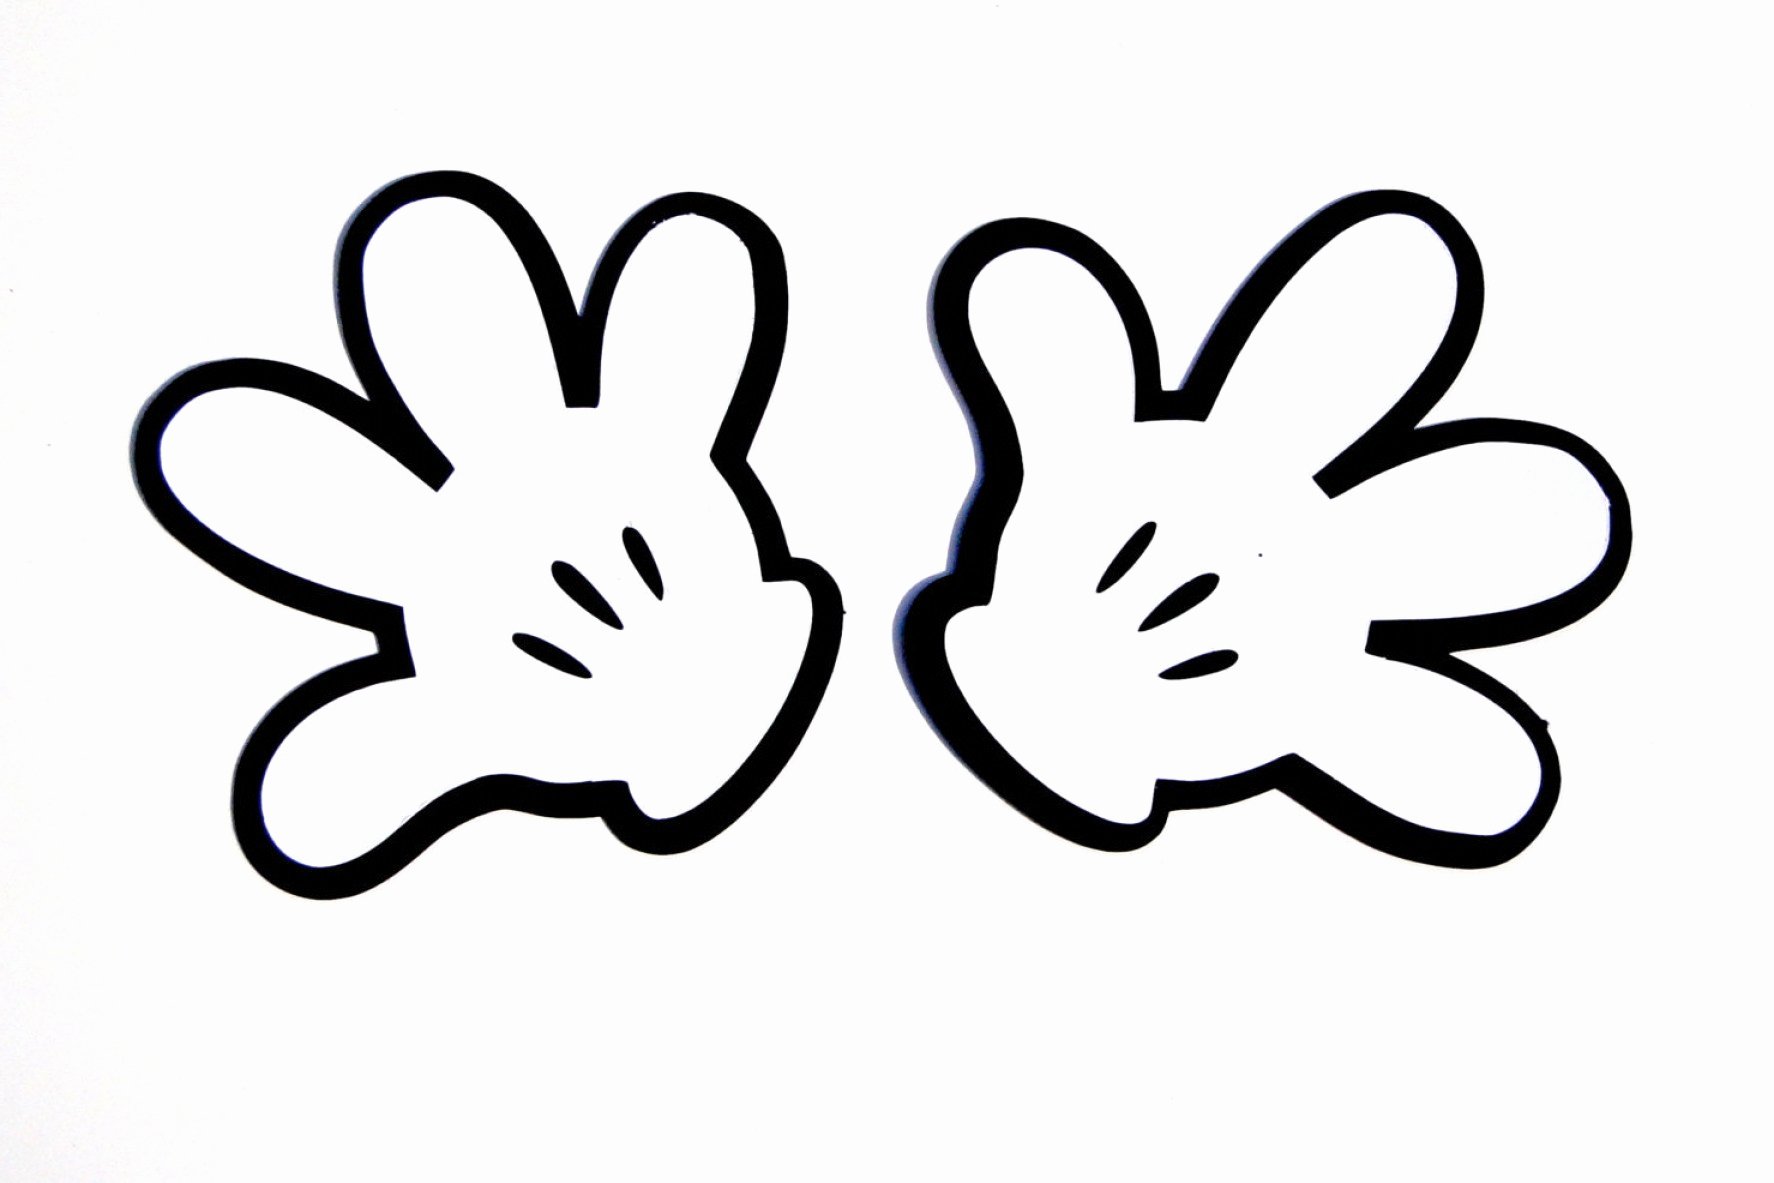 Hand Cut Out Template Elegant Cute Mickey Mouse Hands Cut Out Template